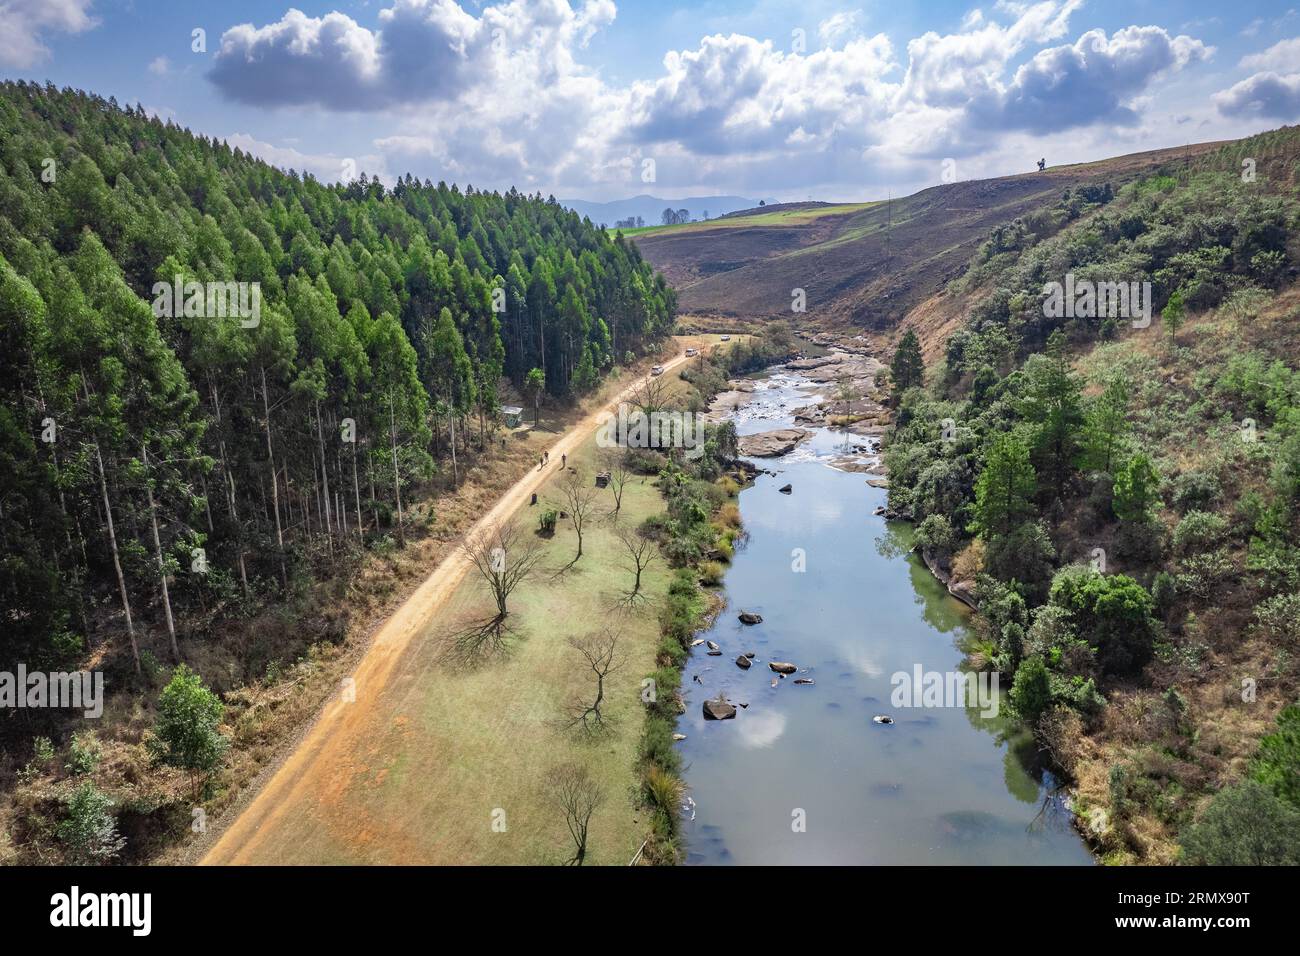 Aerial view of the Karkloof Falls in Howick, KwaZulu Natal, South Africa Stock Photo